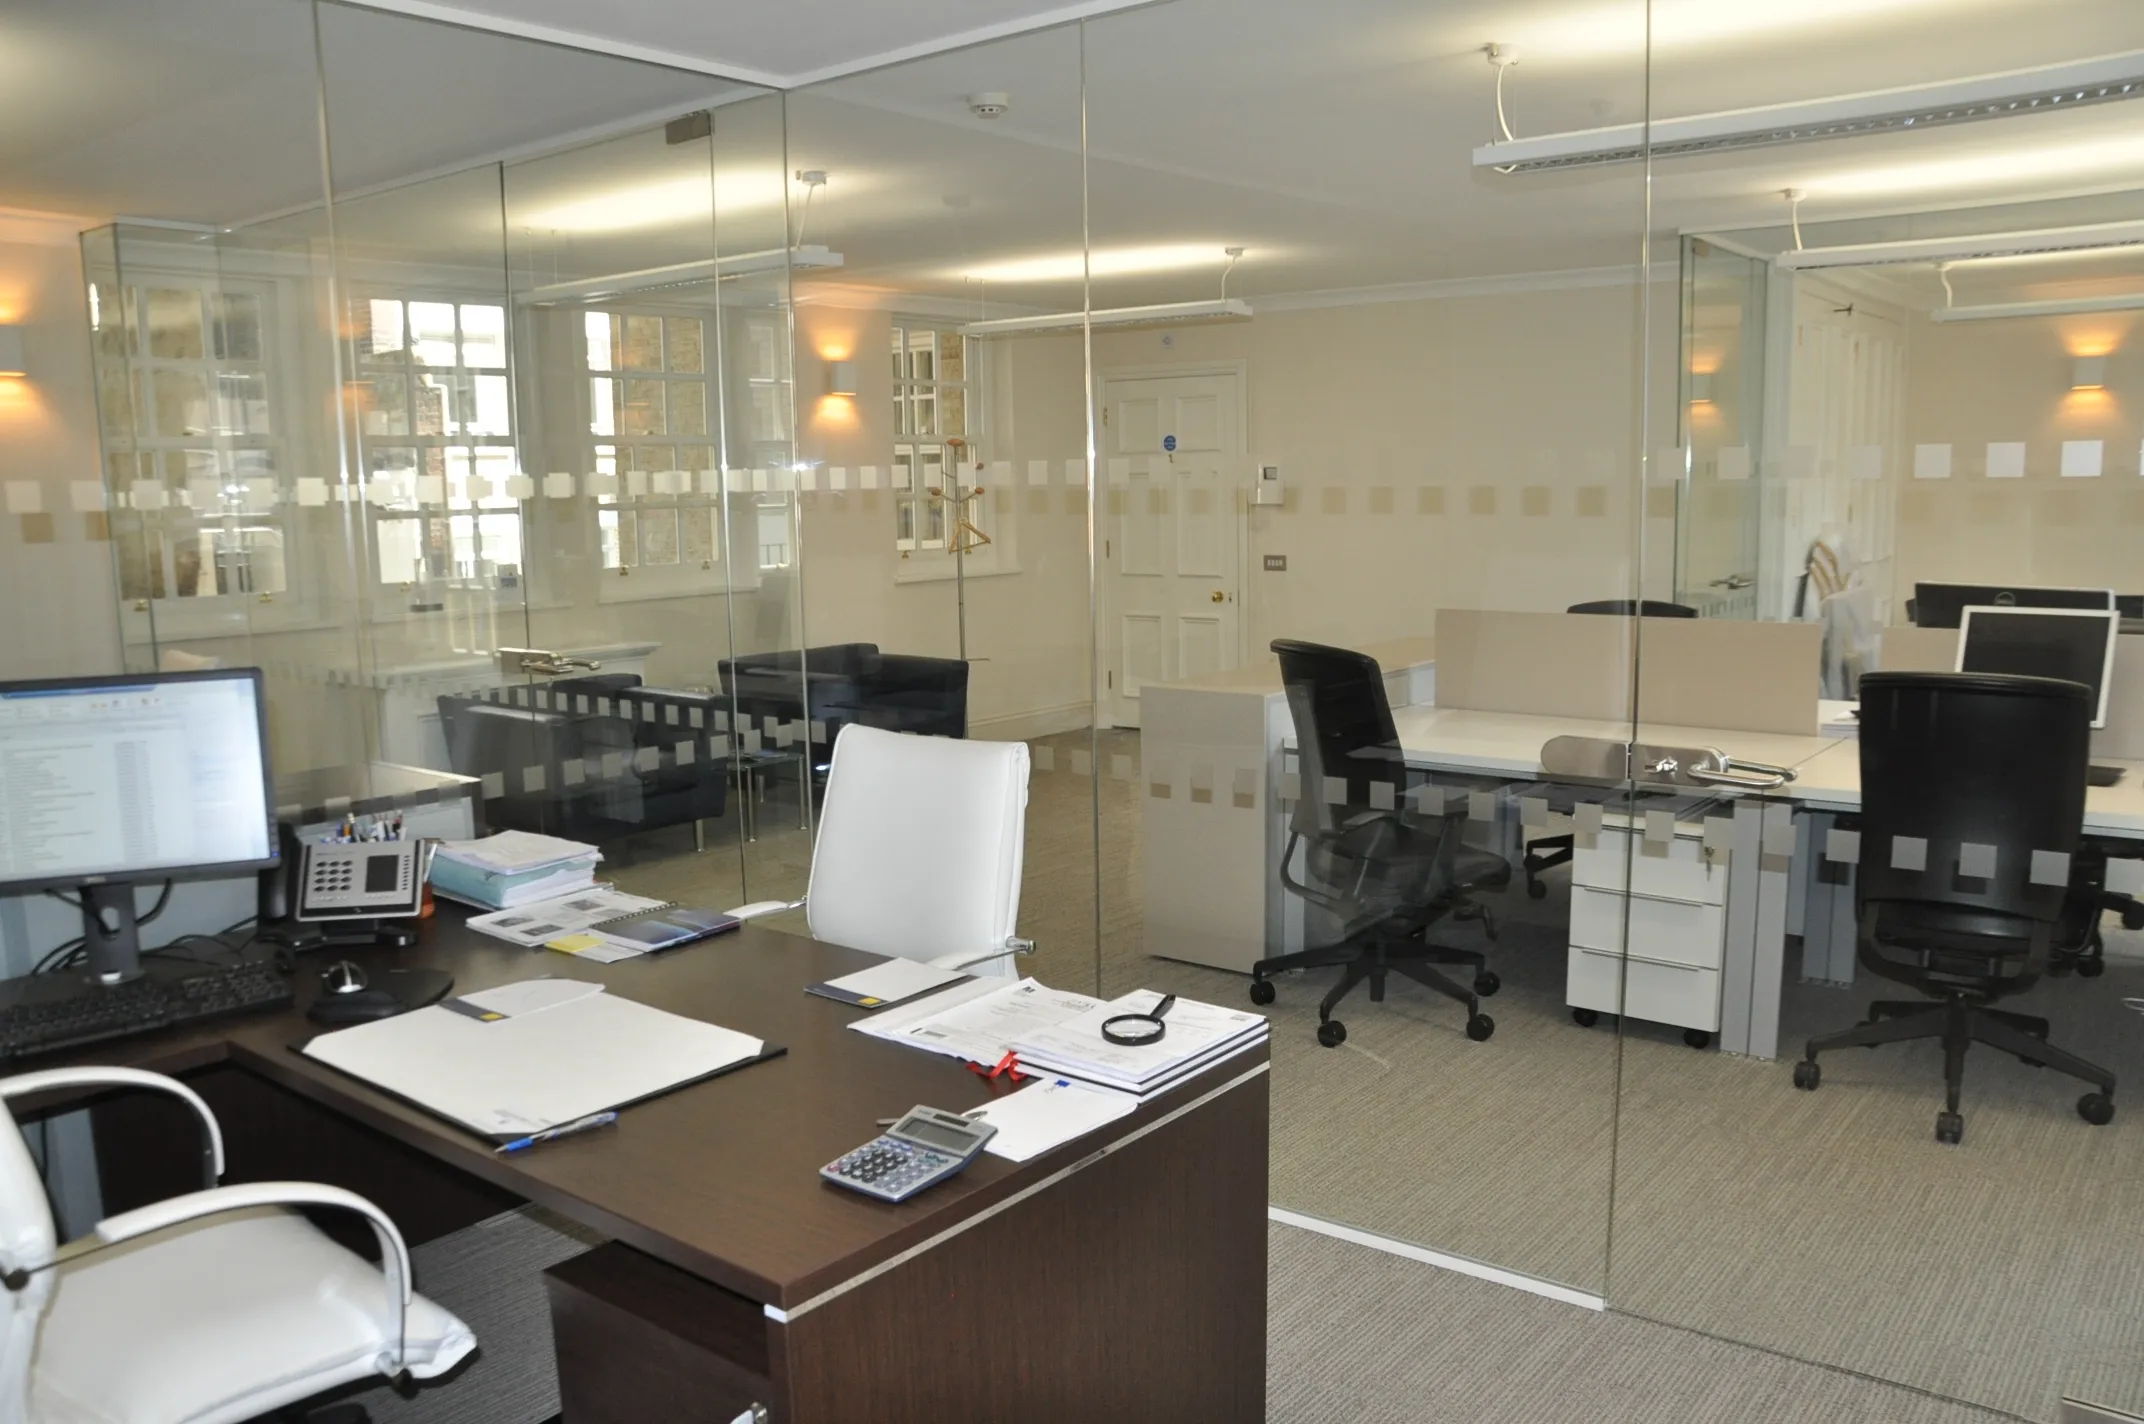 Executive and work area divided with glass partitions